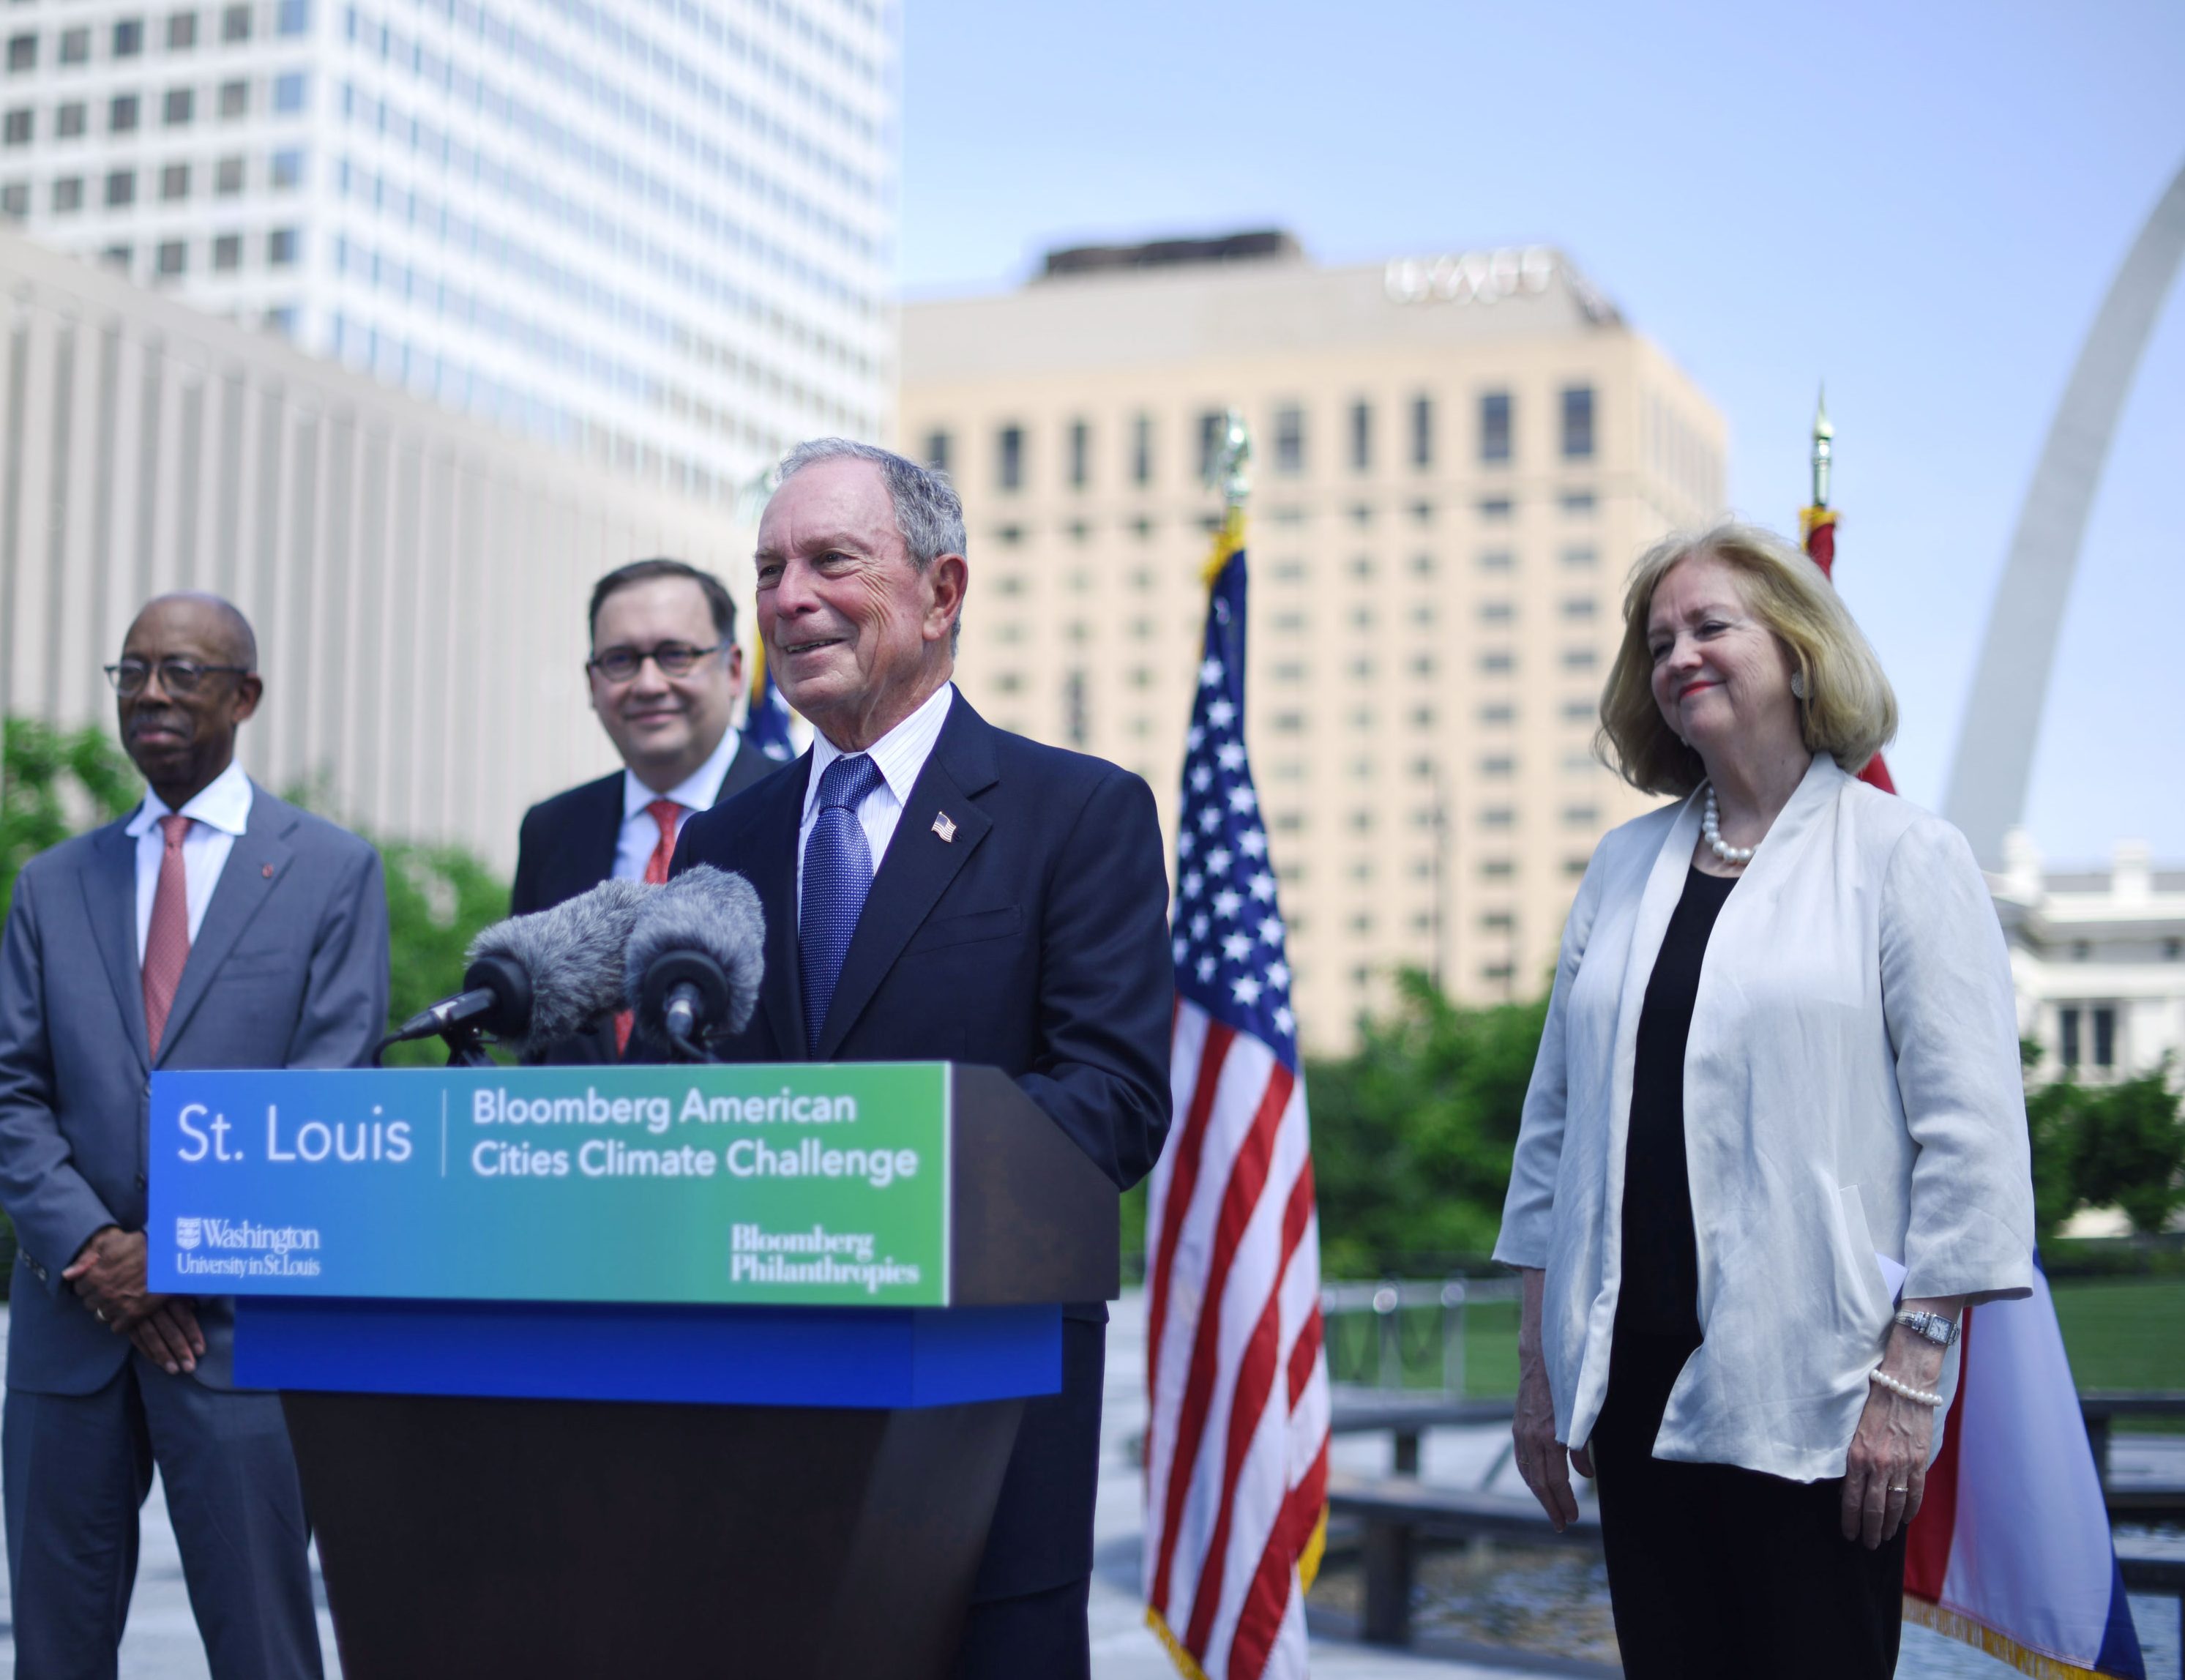 Mike Bloomberg announces St. Louis as a winner of the Bloomberg American Cities Climate Challenge